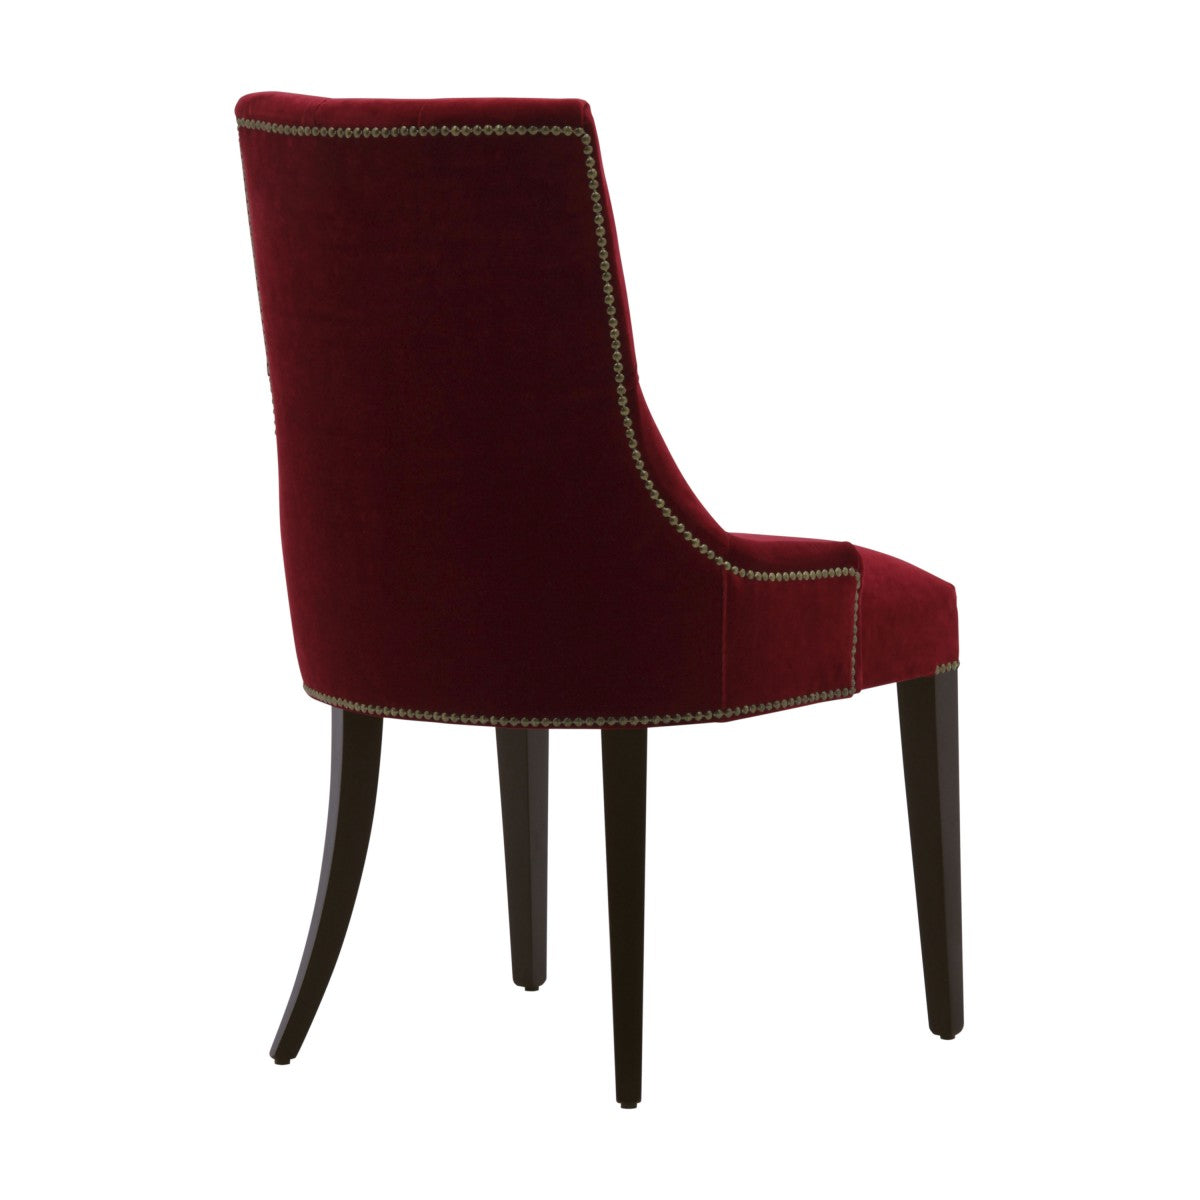 Olympia Bespoke Upholstered Modern Contemporary Dining Chair MS410S Custom Made To Order